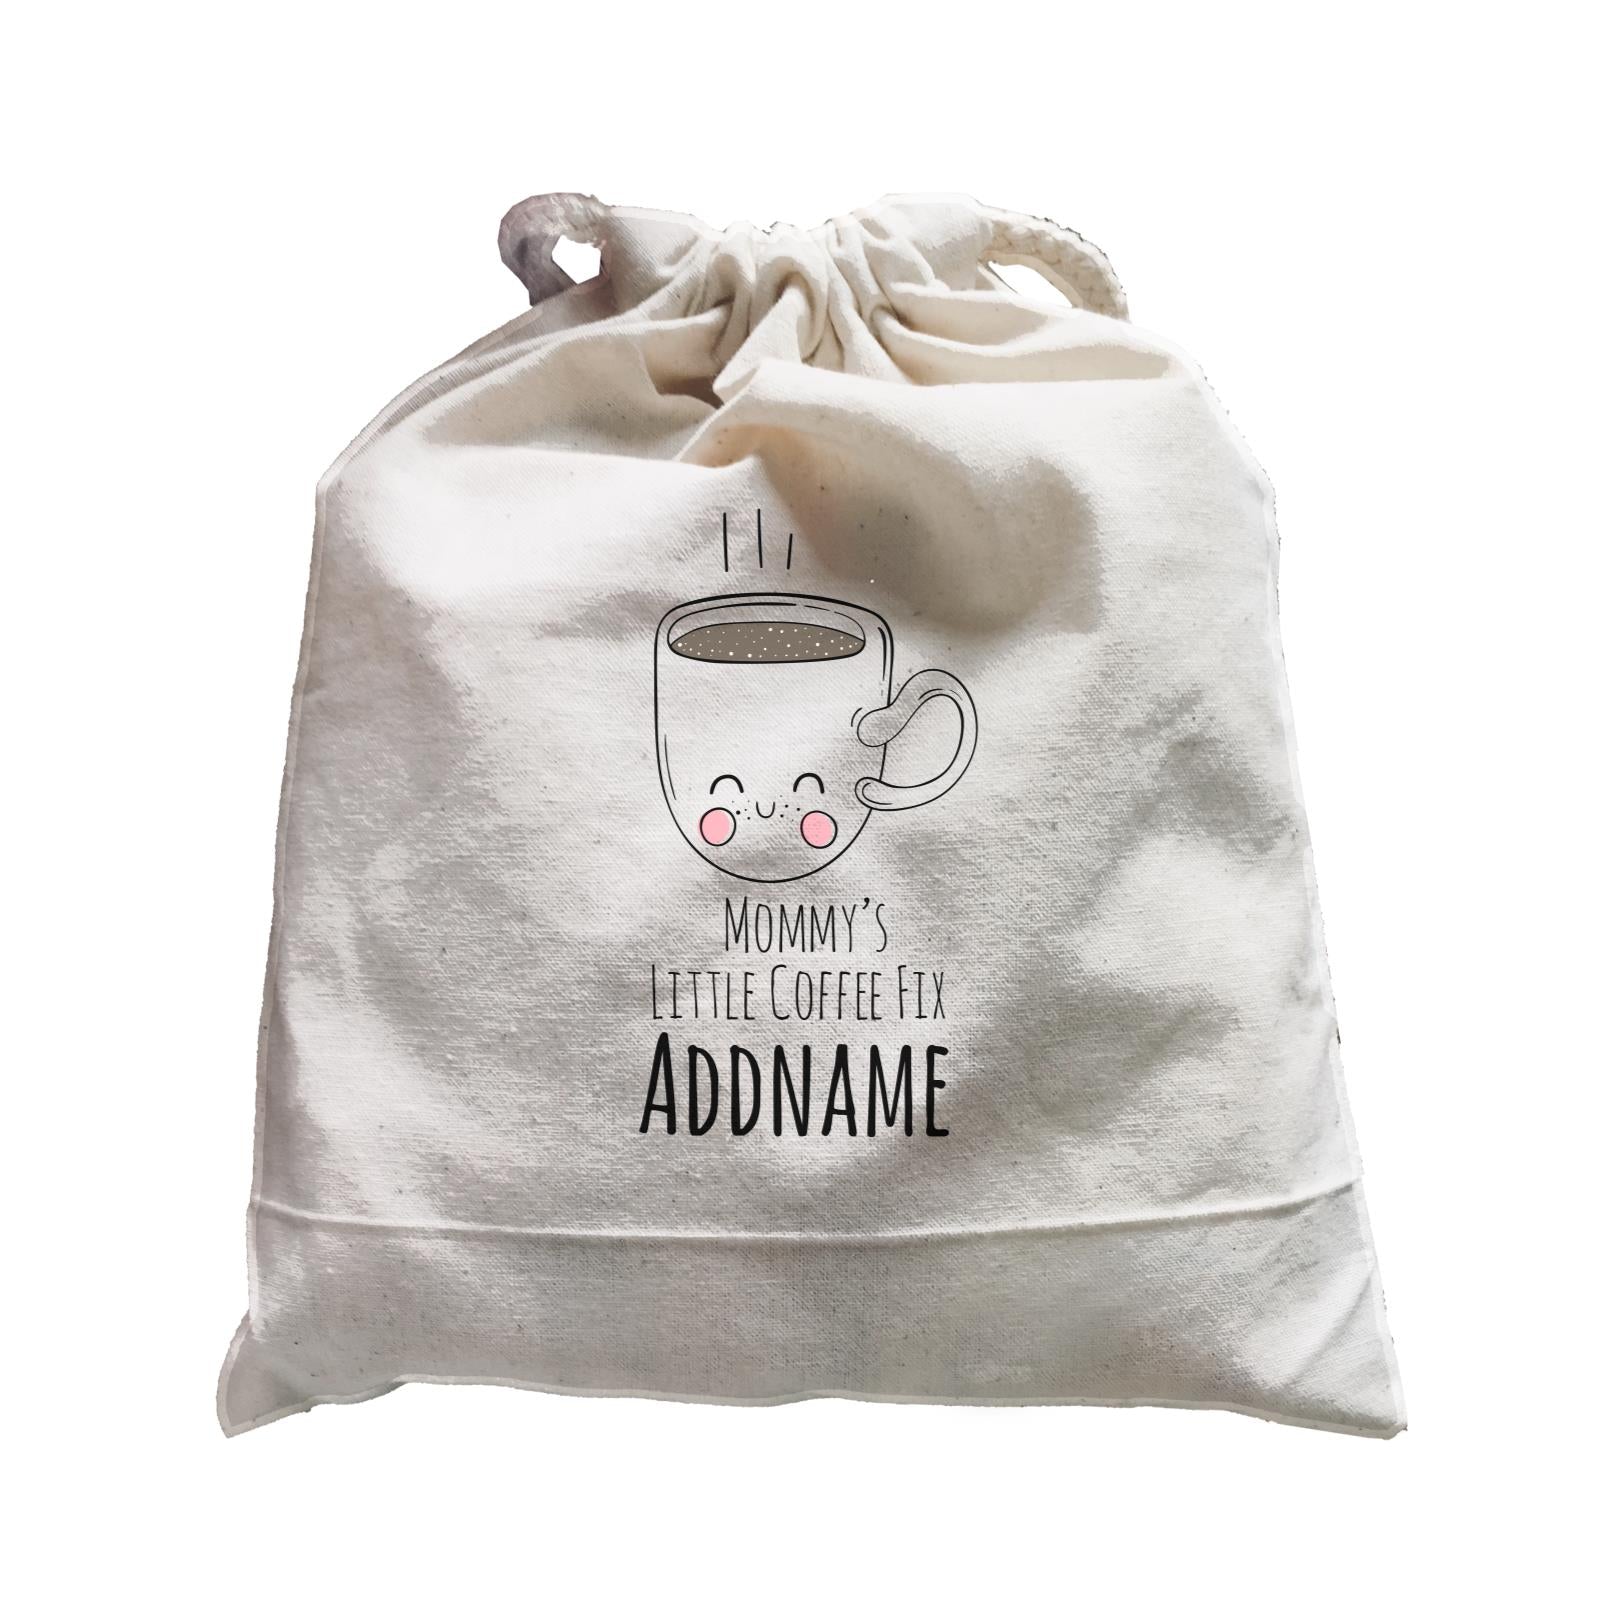 Drawn Sweet Snacks Mommy's Little Coffee Addname Satchel